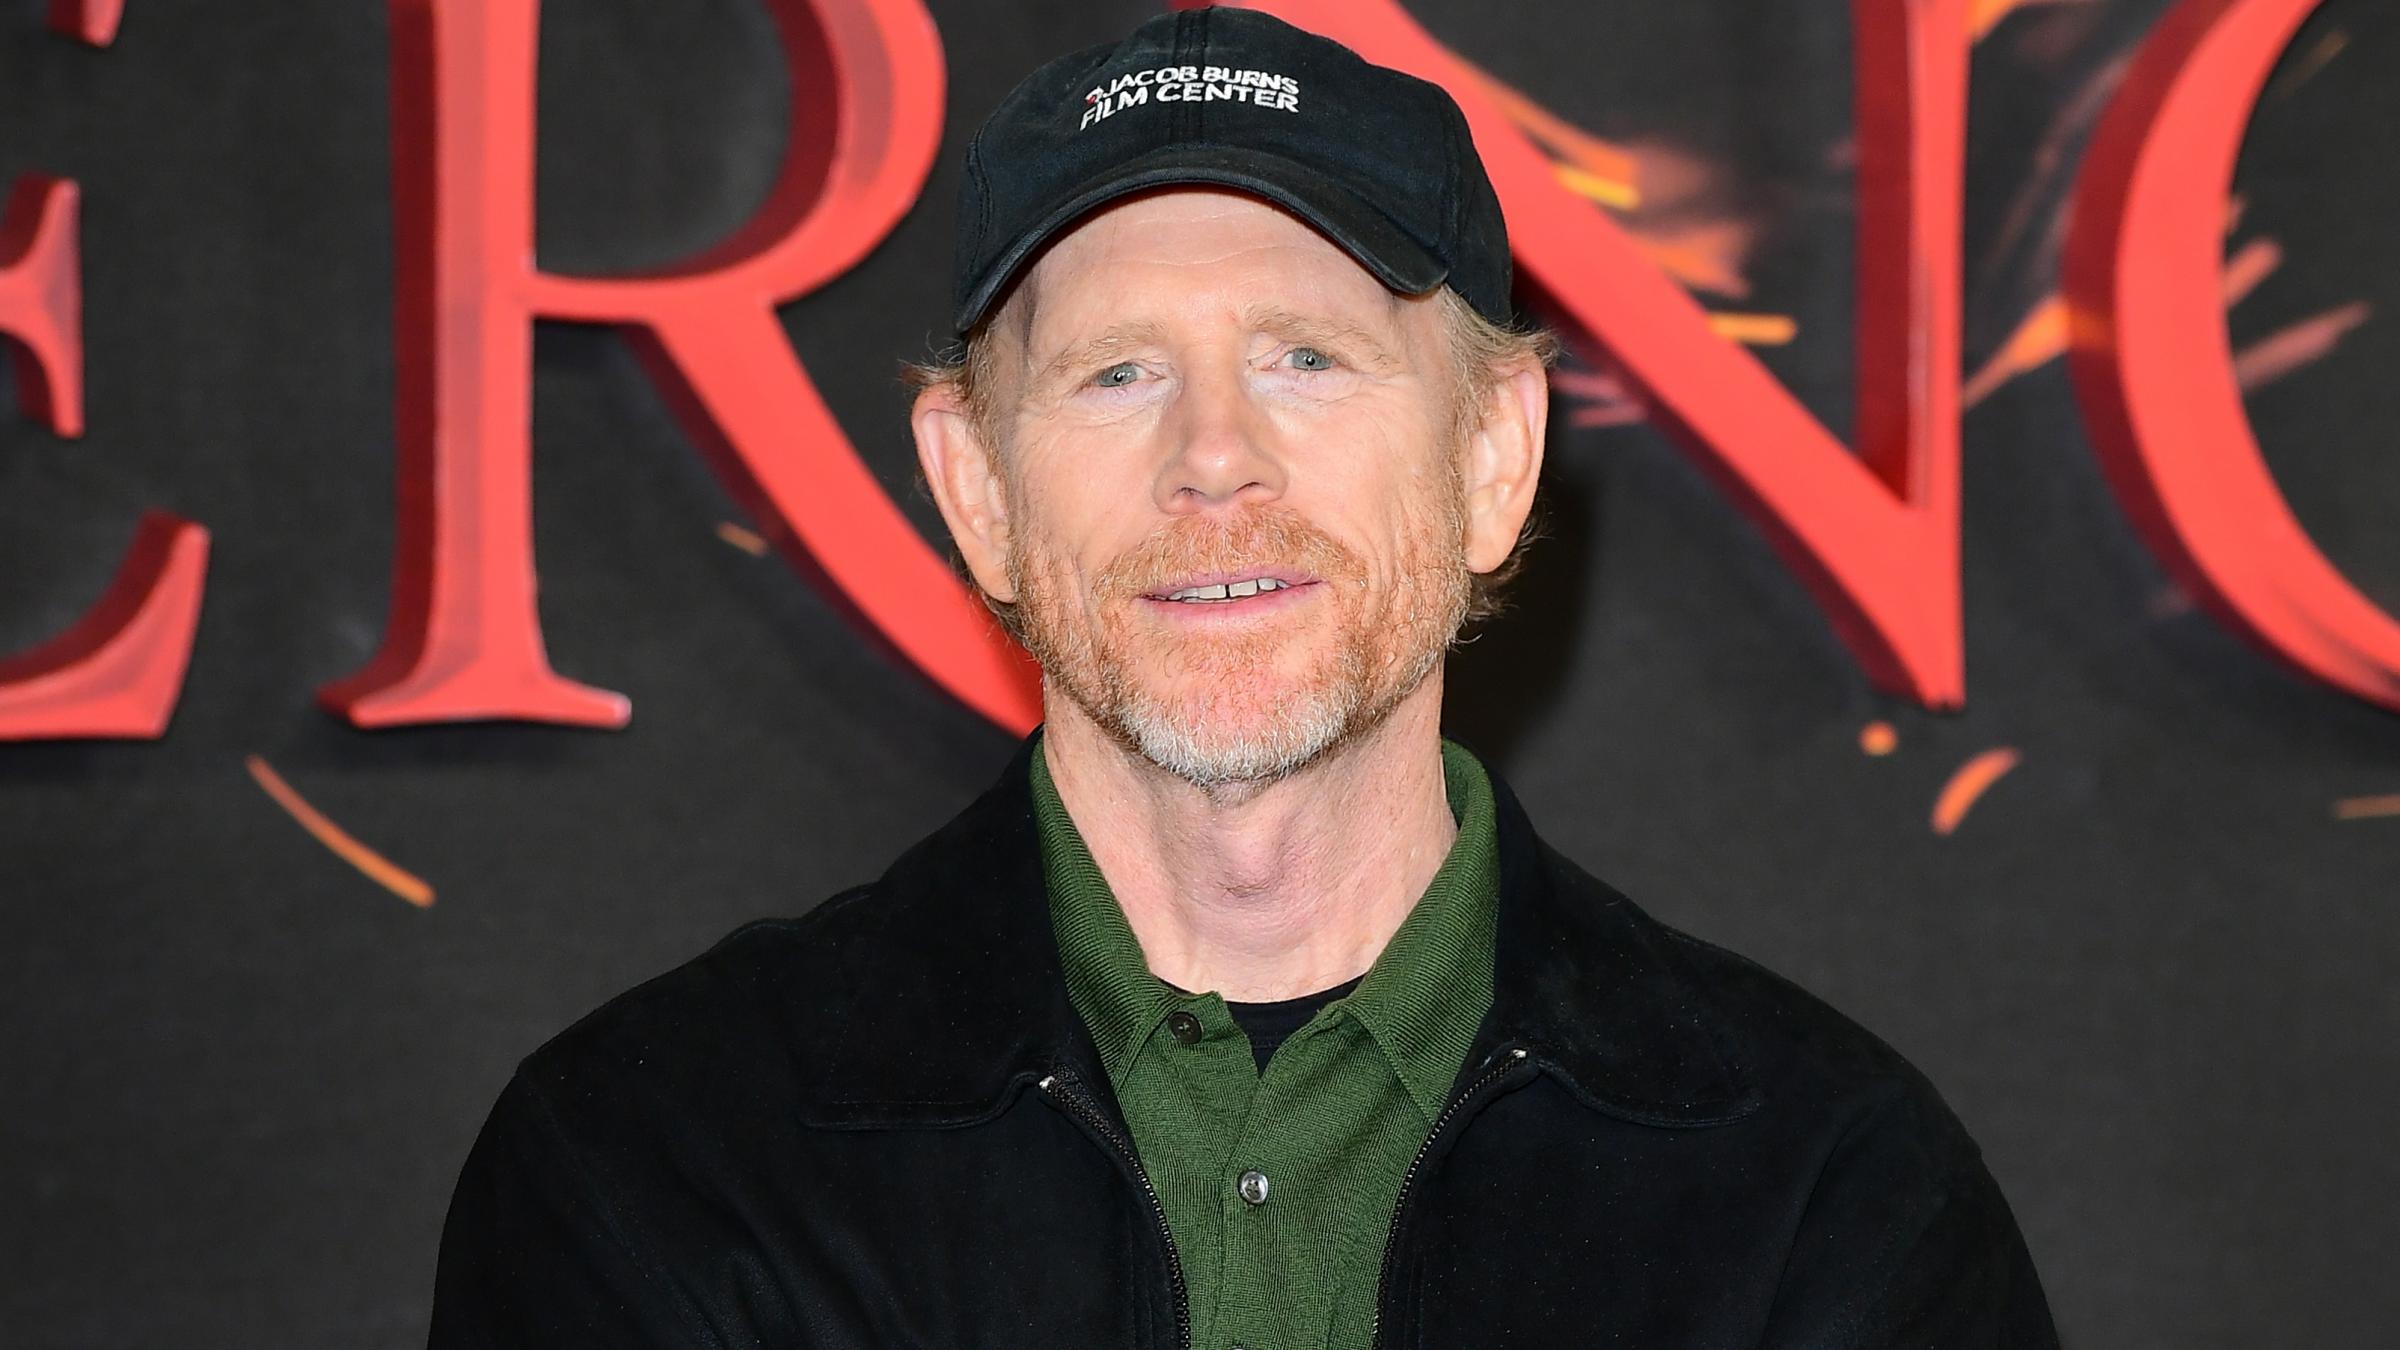 Ron Howard has stepped in to direct the Han Solo movie